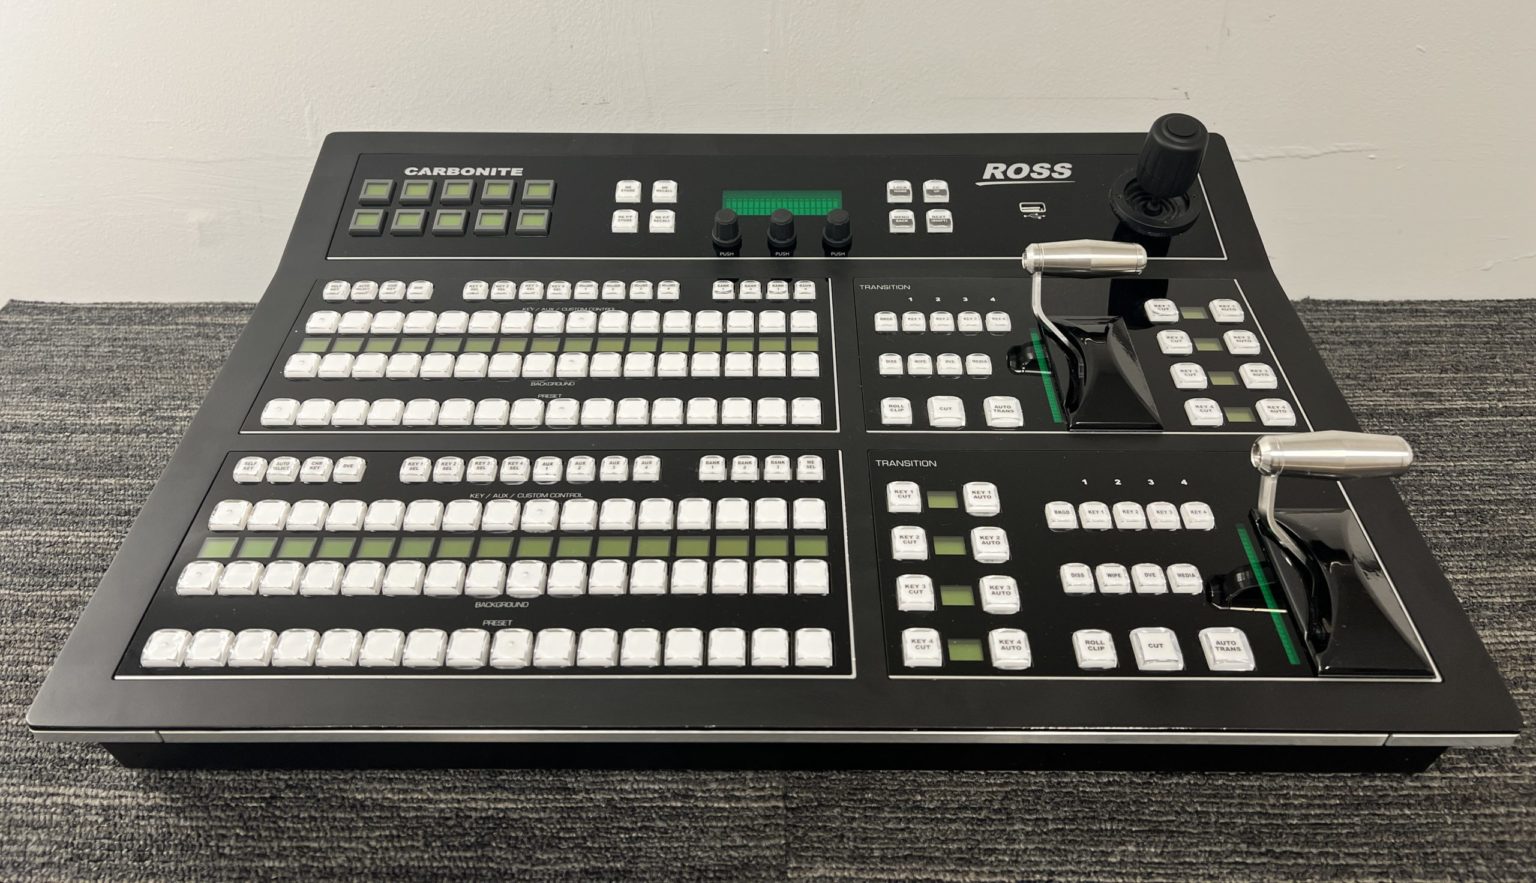 ross carbonite switchers